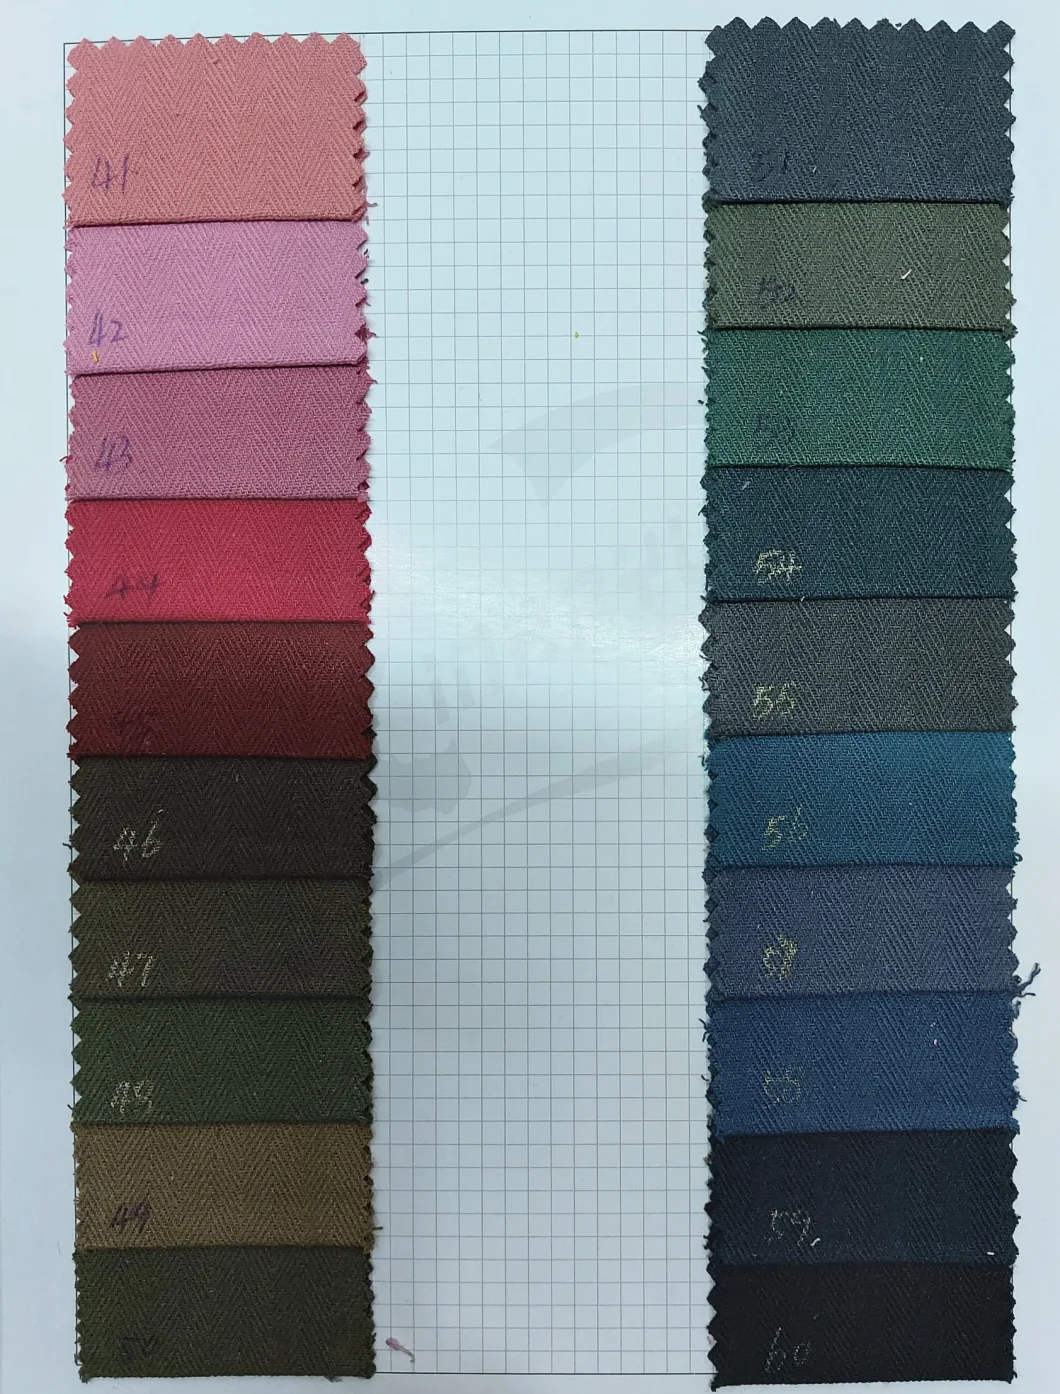 Stock and Textile Cotton New Design Dyed Herringbone Fabrics for Garment Fabric